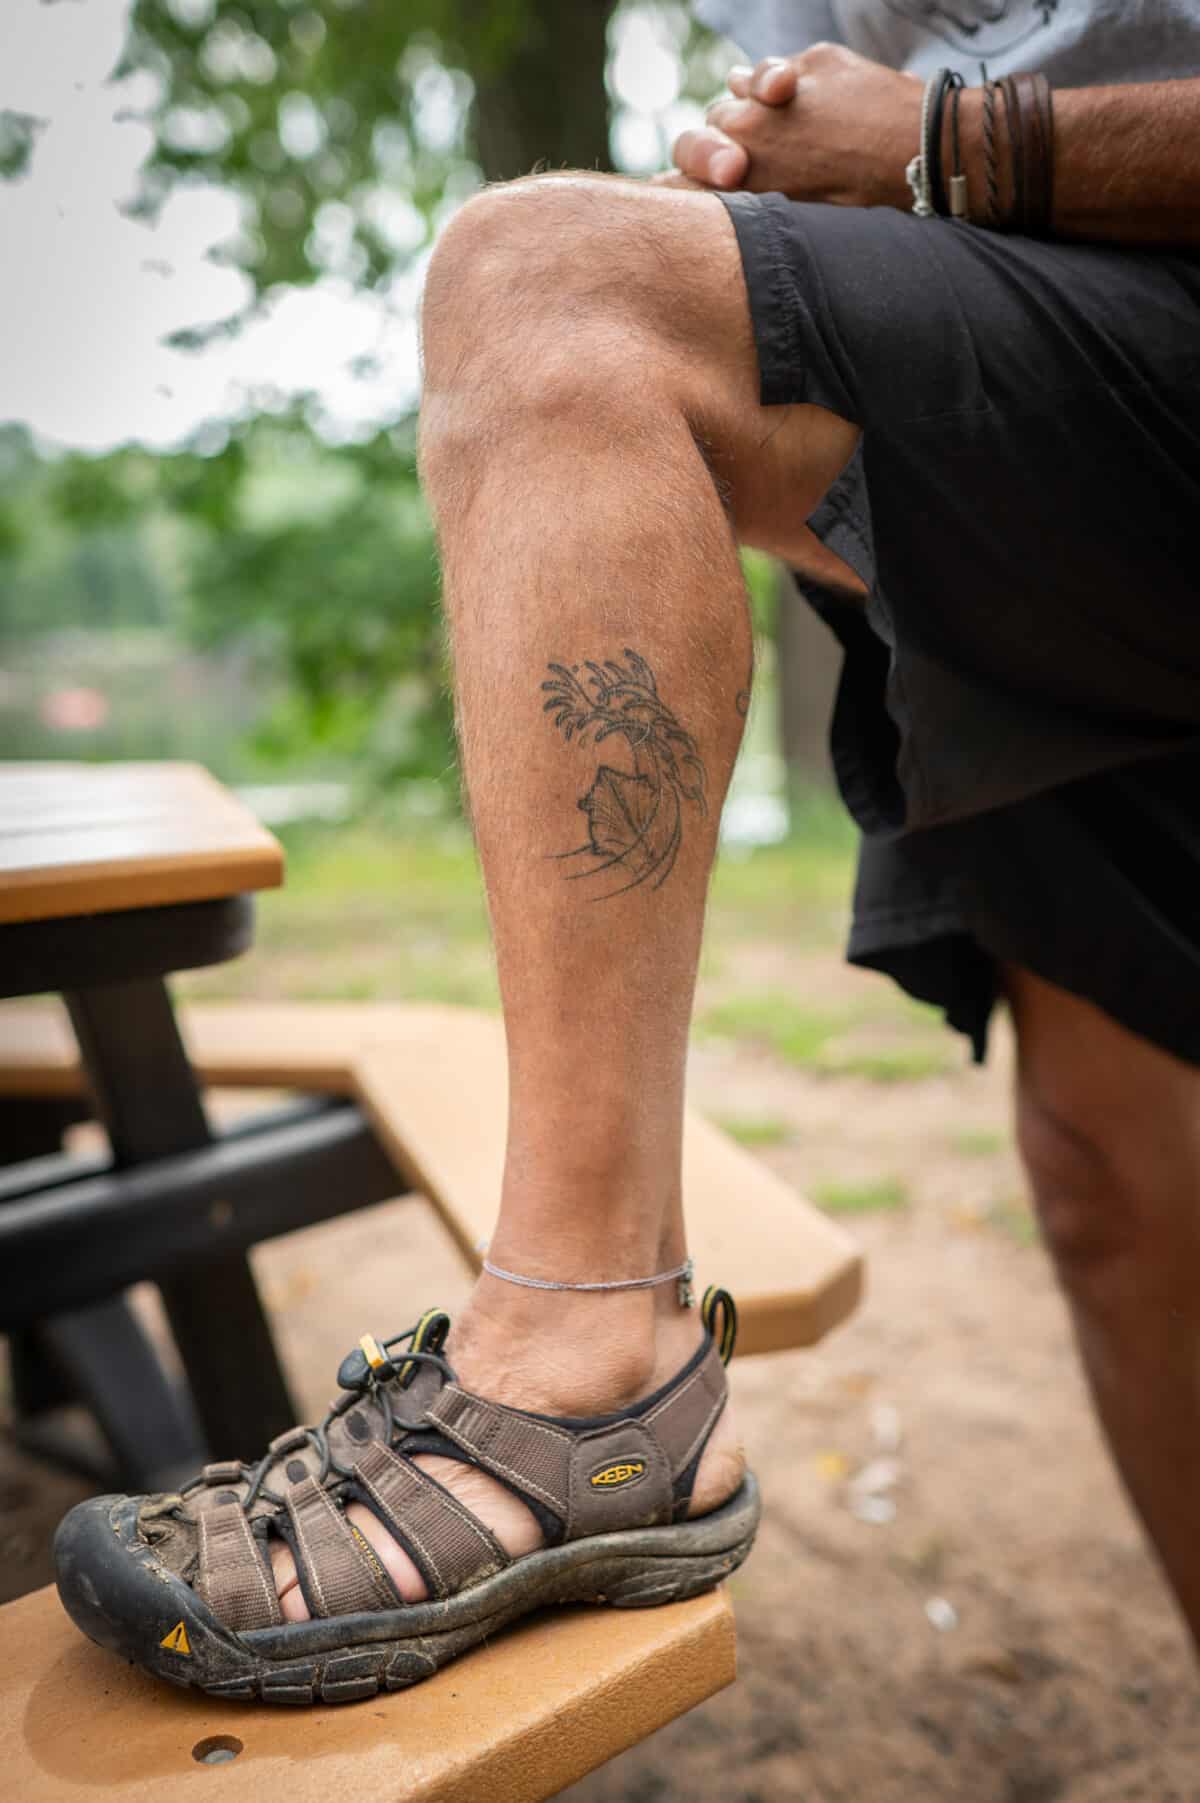 Byron Karns, 63, of Ely, MN, shows off his tattoo of the Threehorn Wartyback mussel, a native species in the St. Croix river on September 11, 2023 in Taylors Falls, MN.